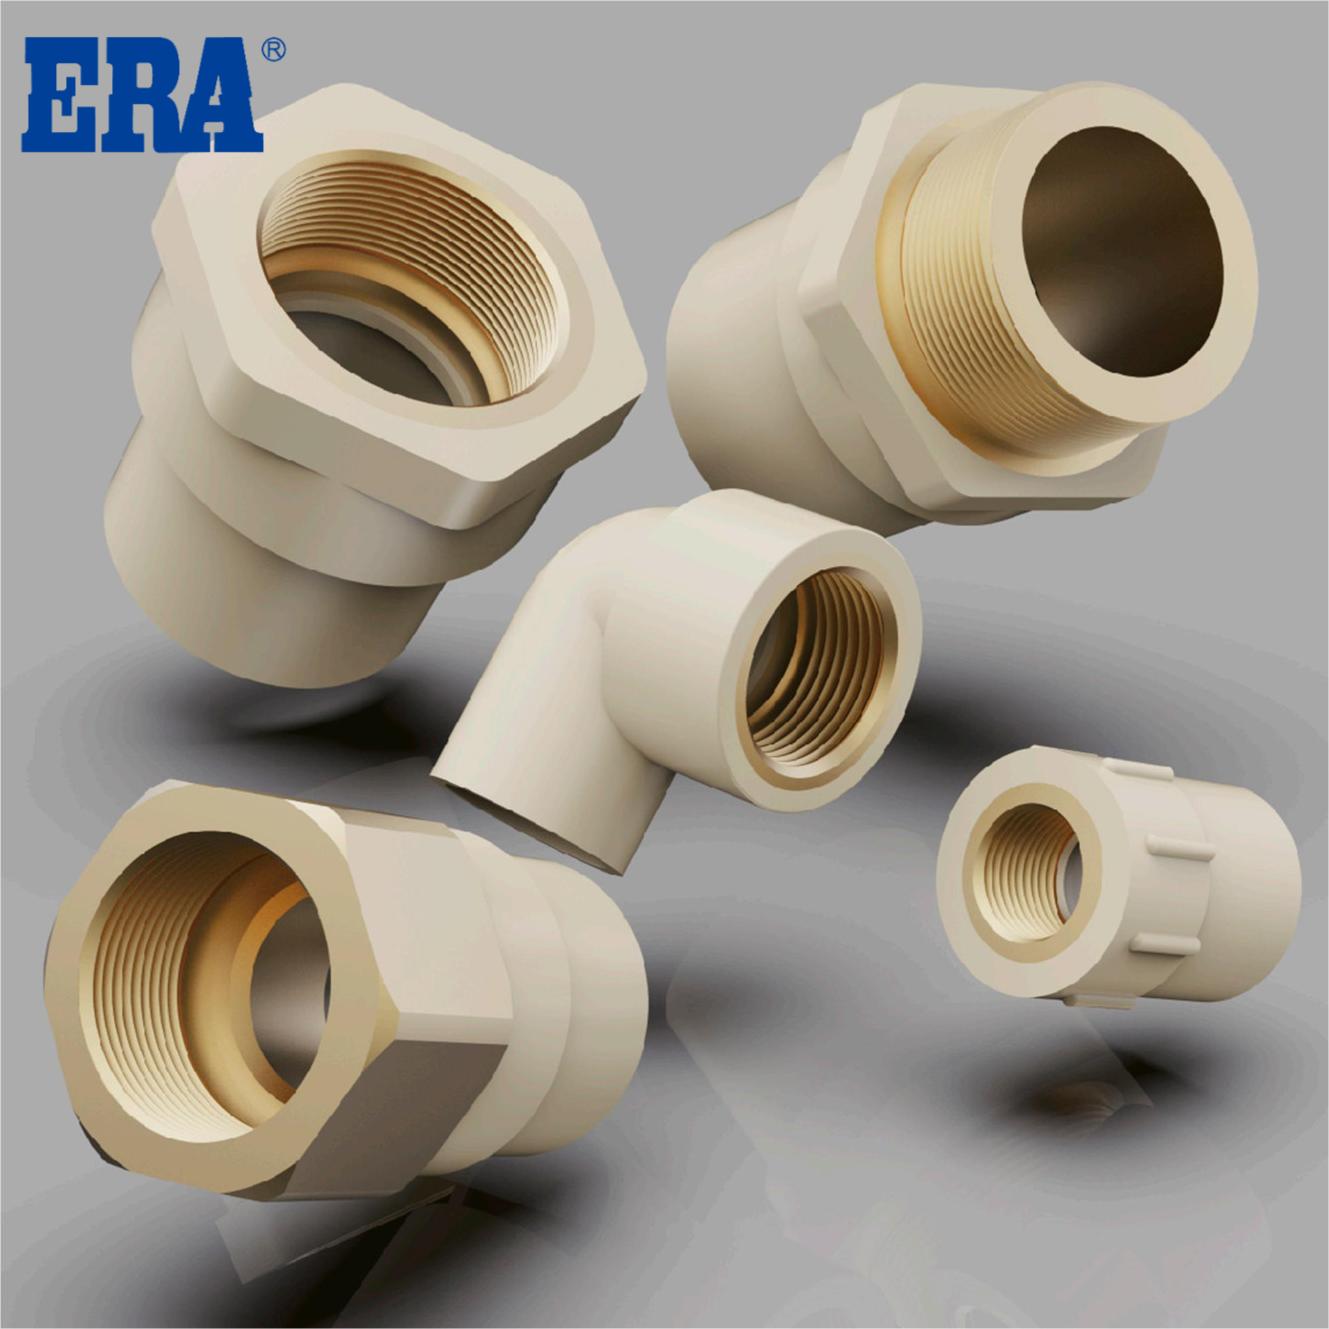 CPVC ASTM D2846 CTS PIPES&FITTINGS